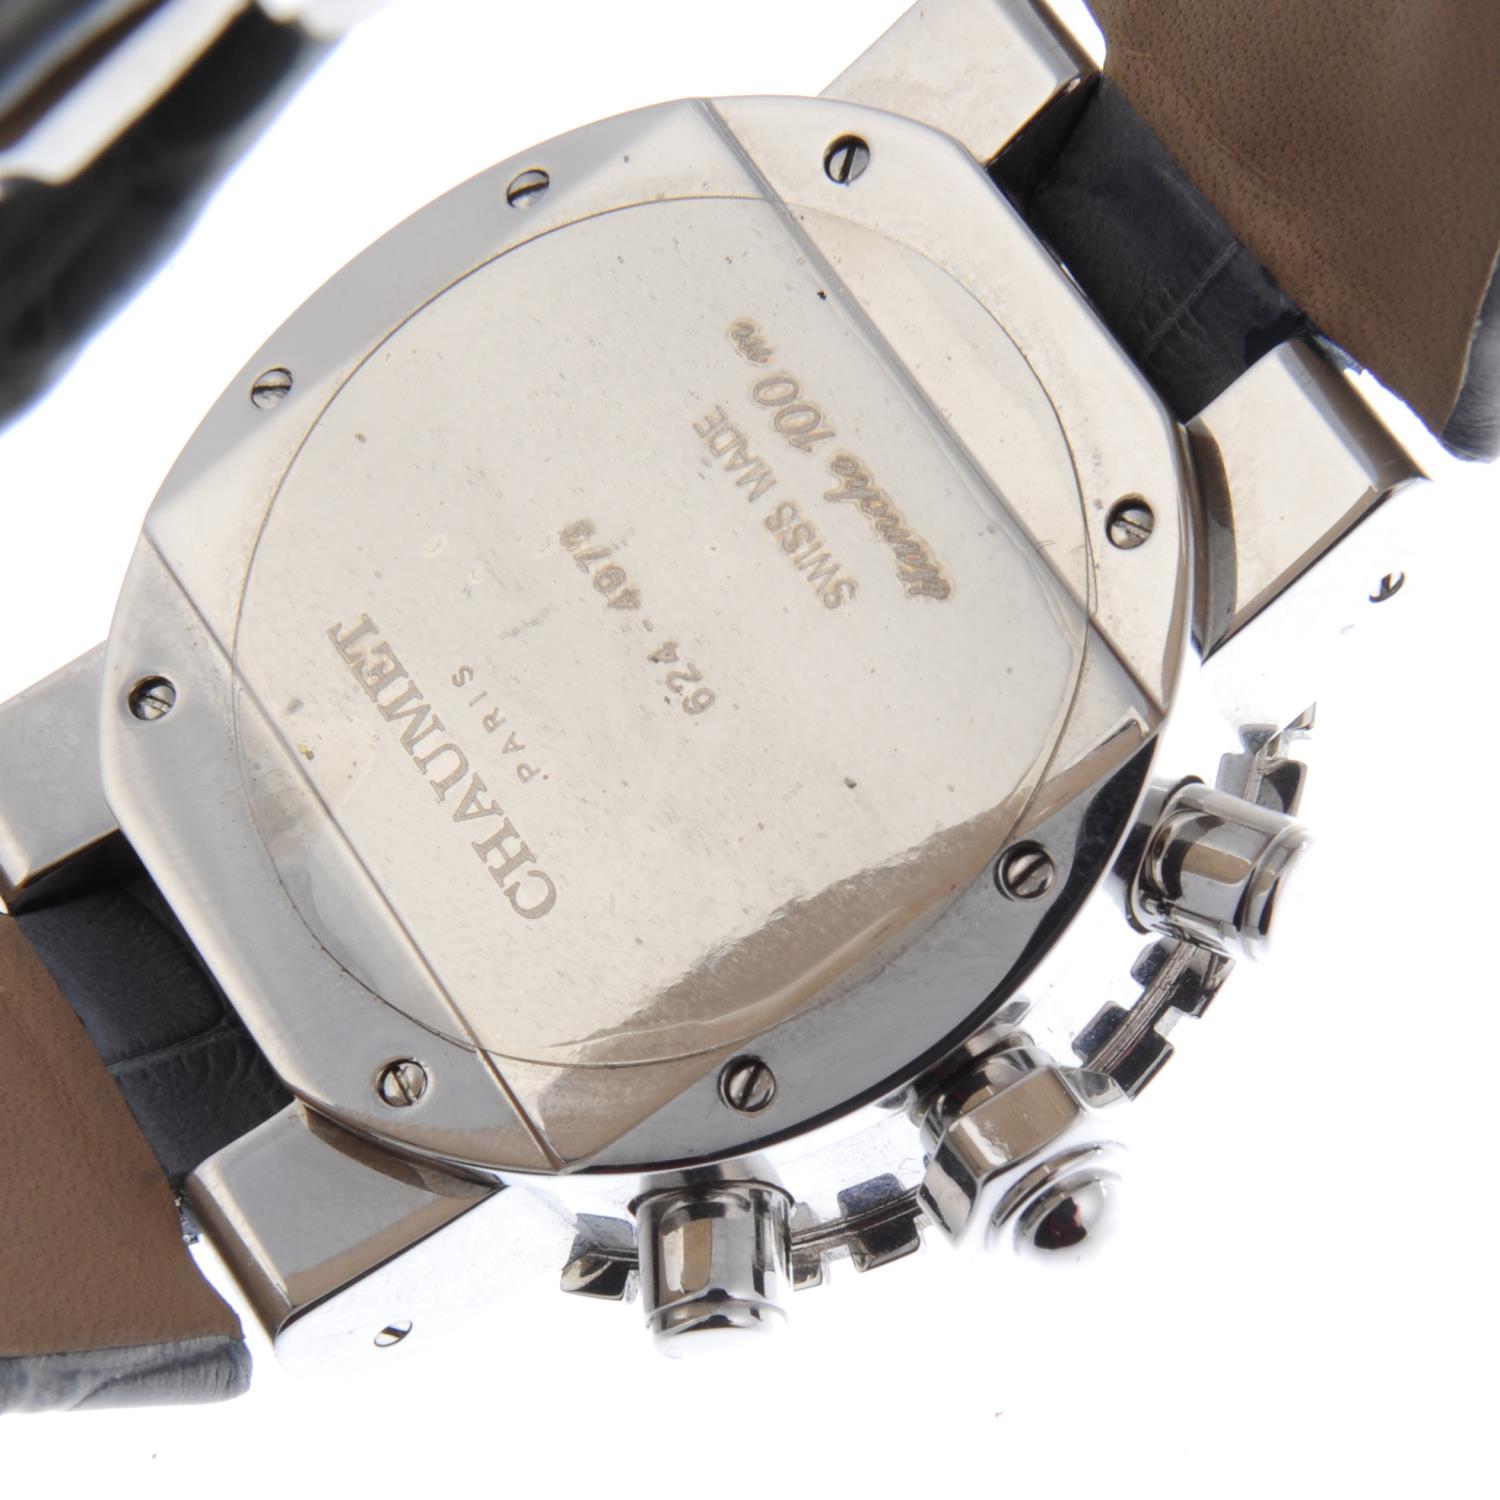 CHAUMET - a lady's Class One chronograph wrist watch. - Image 3 of 4